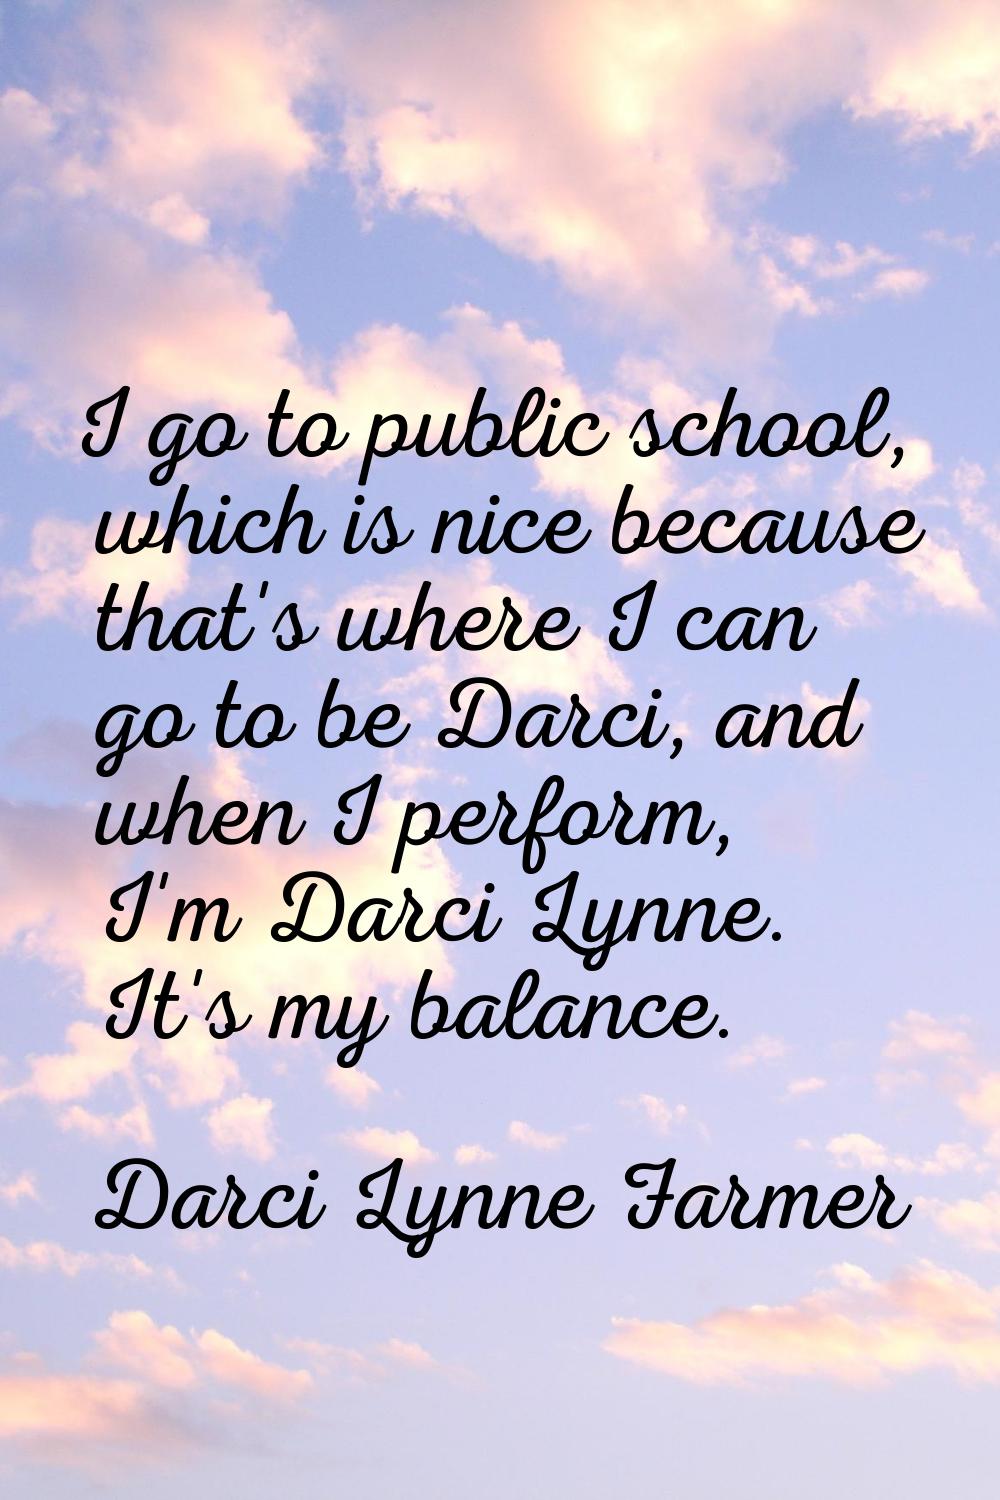 I go to public school, which is nice because that's where I can go to be Darci, and when I perform,